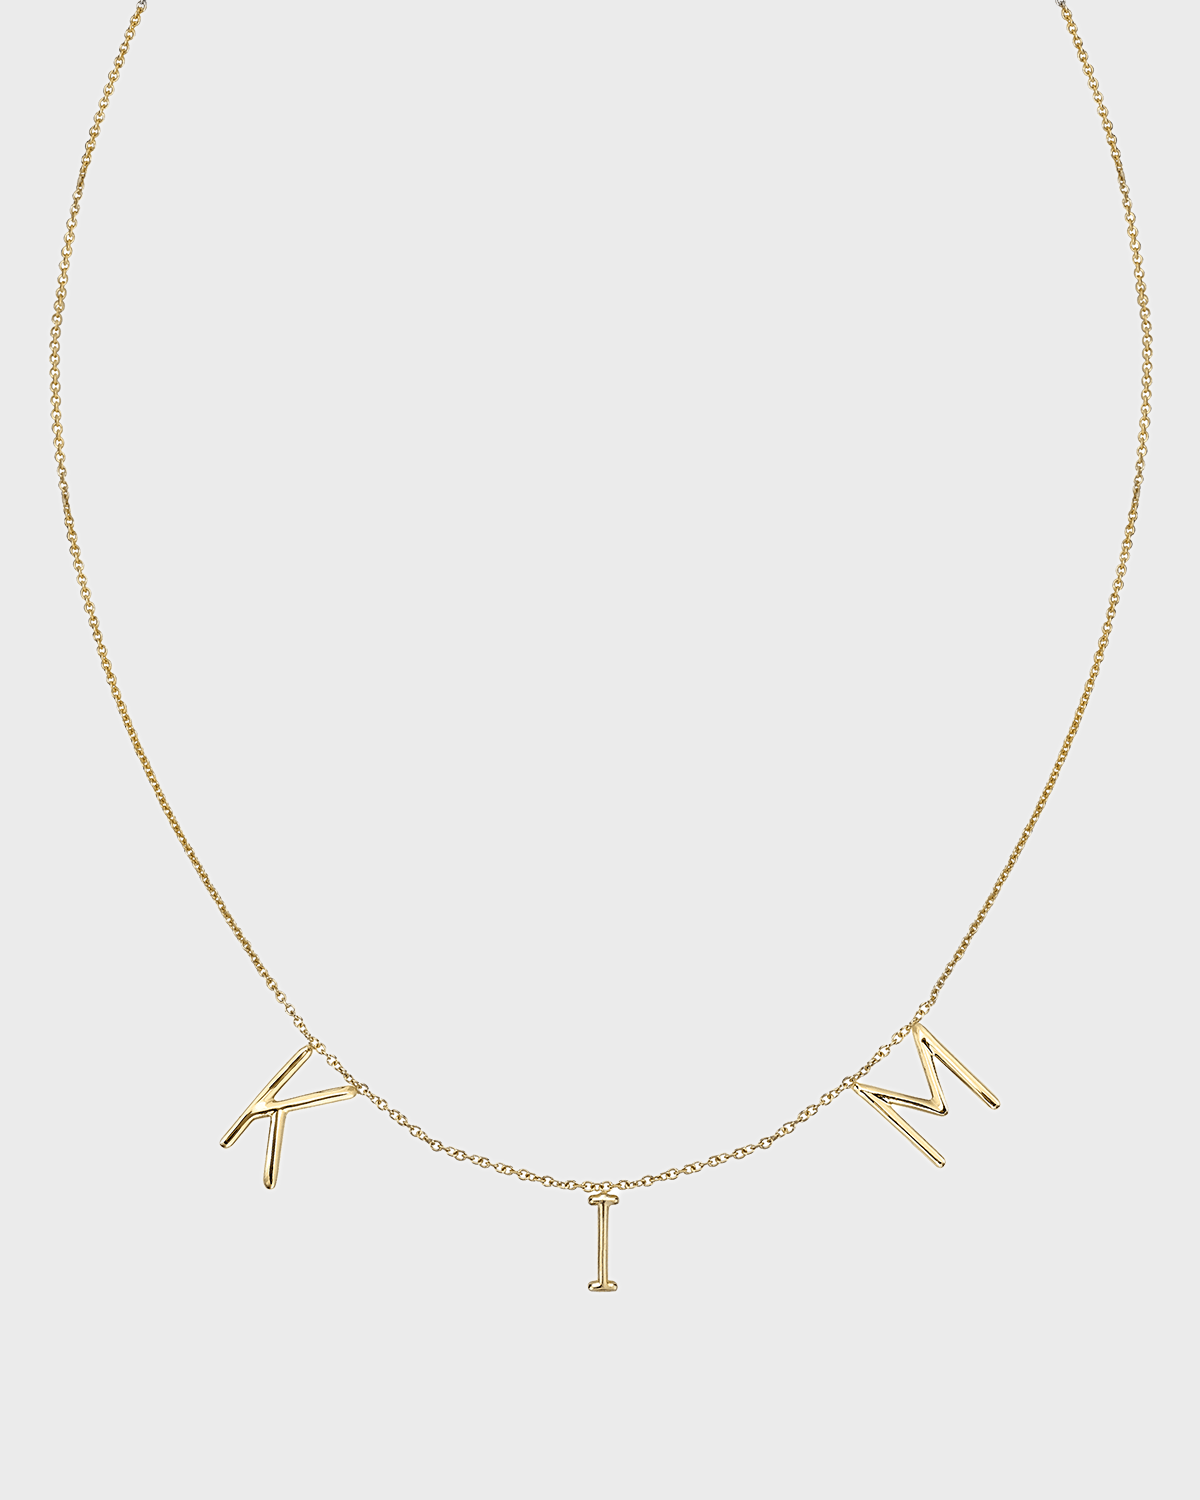 Amelia 14K Gold Personalized 3-Letter Necklace (Made to Order)